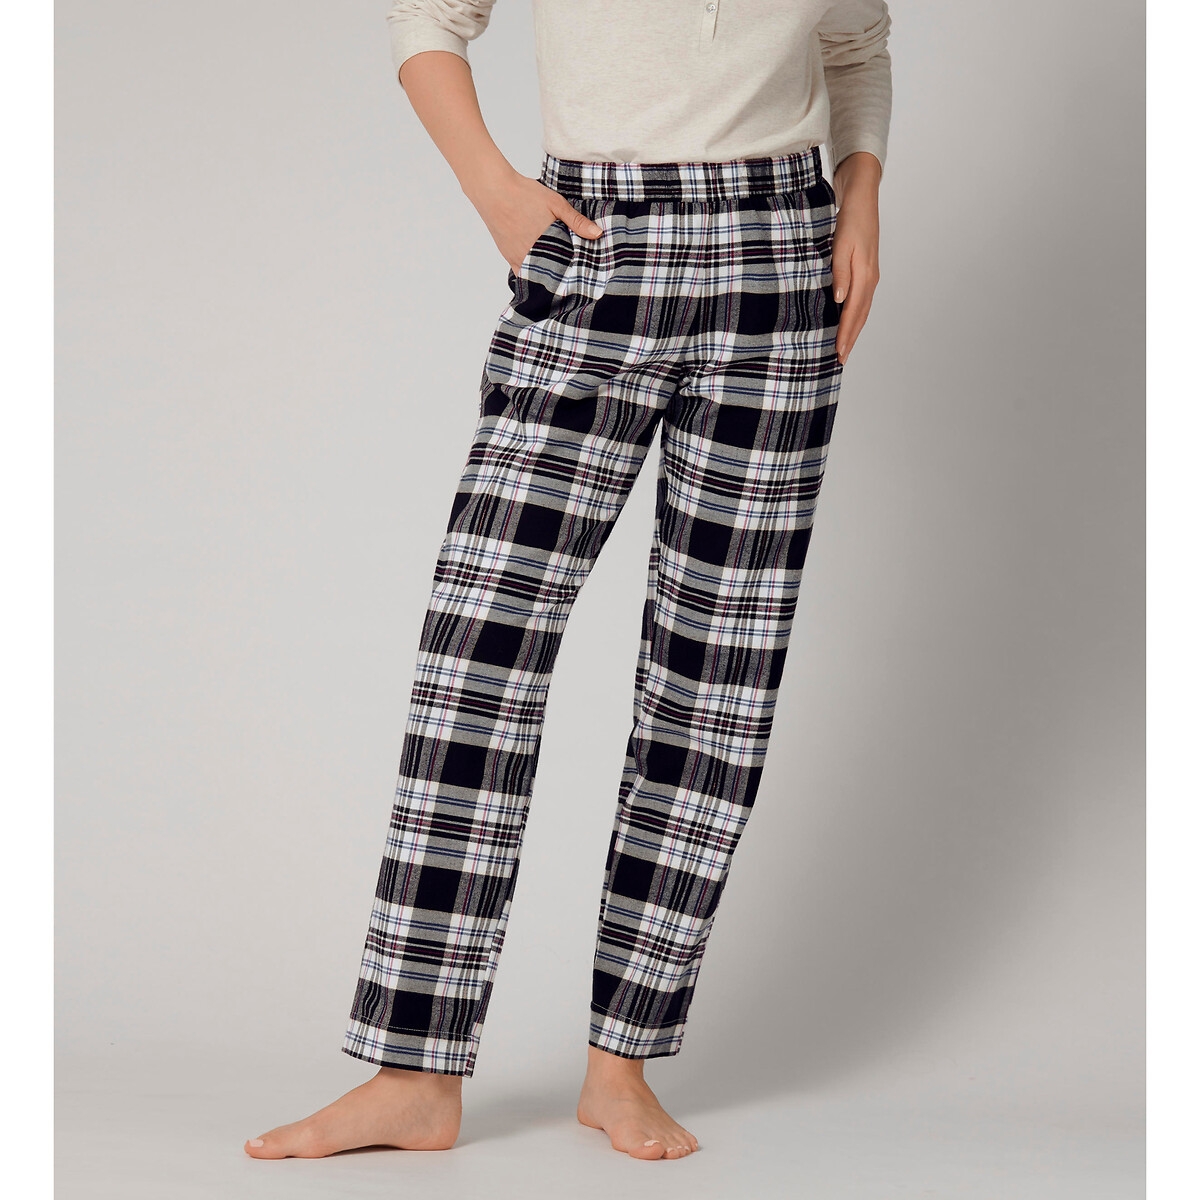 Mix & Match Pyjama Bottoms in Checked Cotton